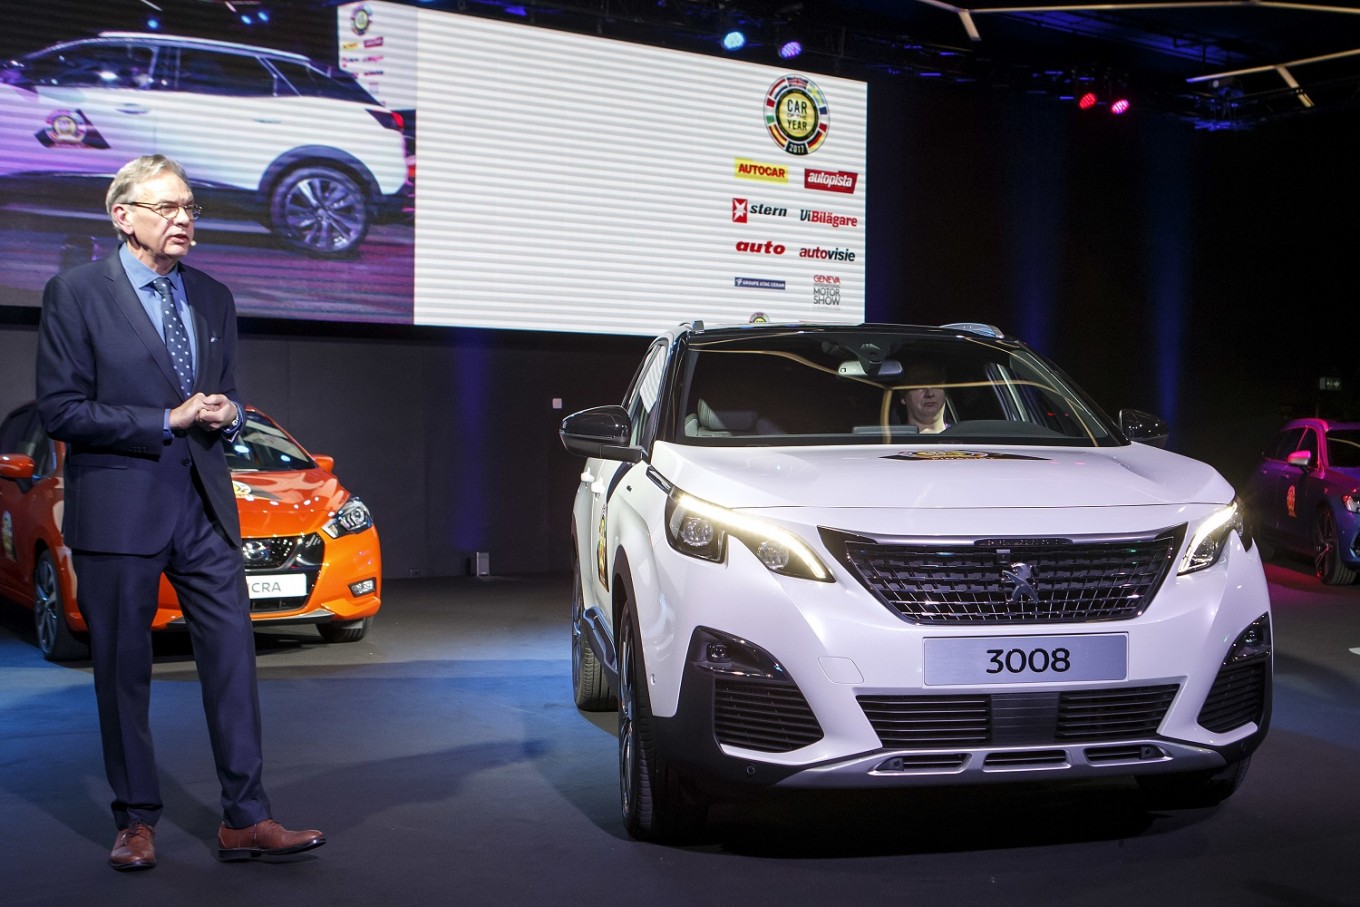 Peugeot 3008 named 'Car of the Year' at Geneva auto show - Lifestyle - The  Jakarta Post